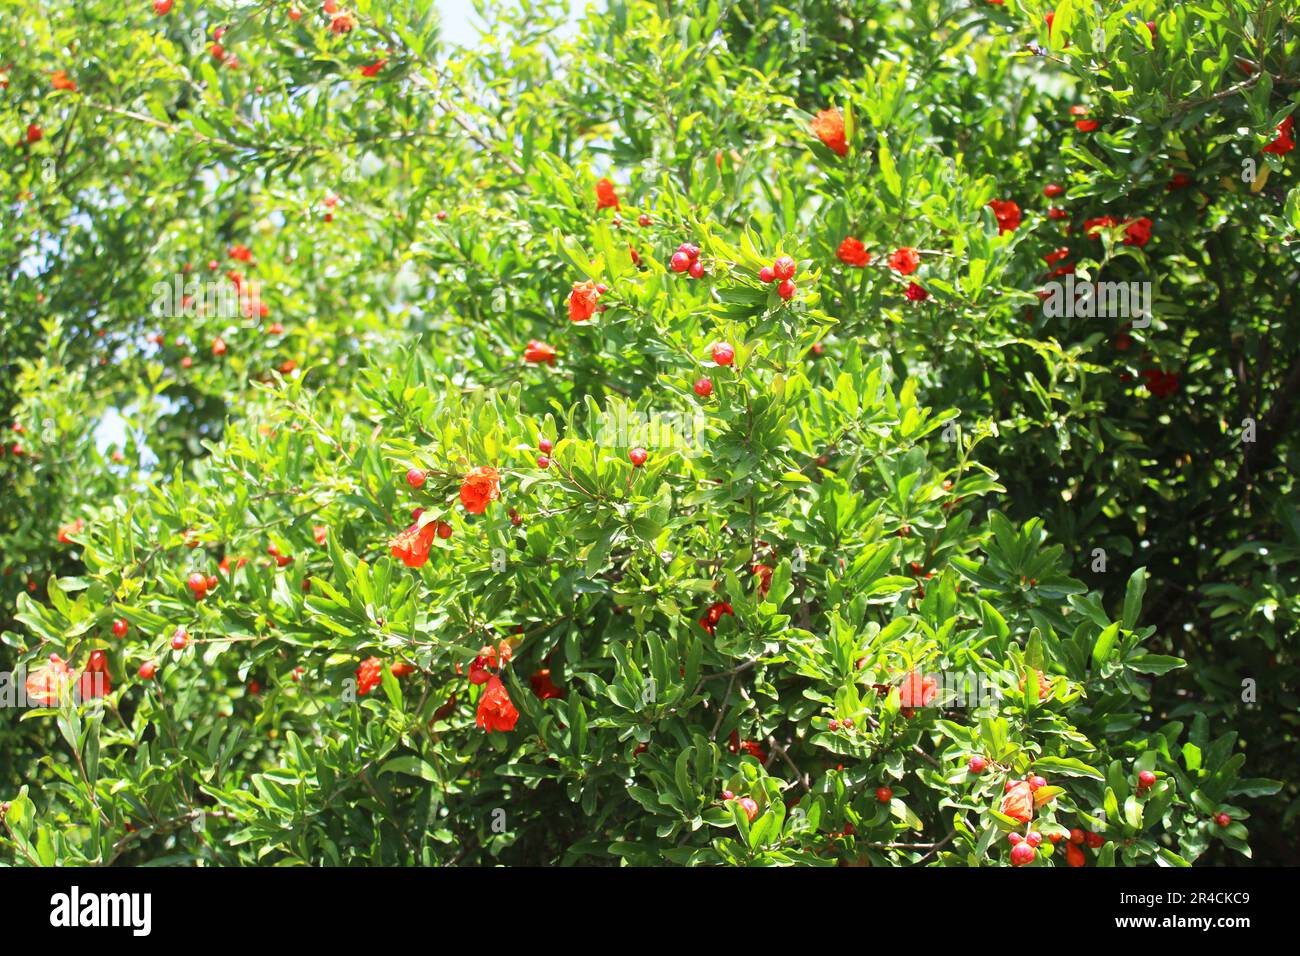 Pomegranate blossoming tree in garden under sun light. Branches of the pomegranate tree (Punica granatum) with bright red flowers Stock Photo